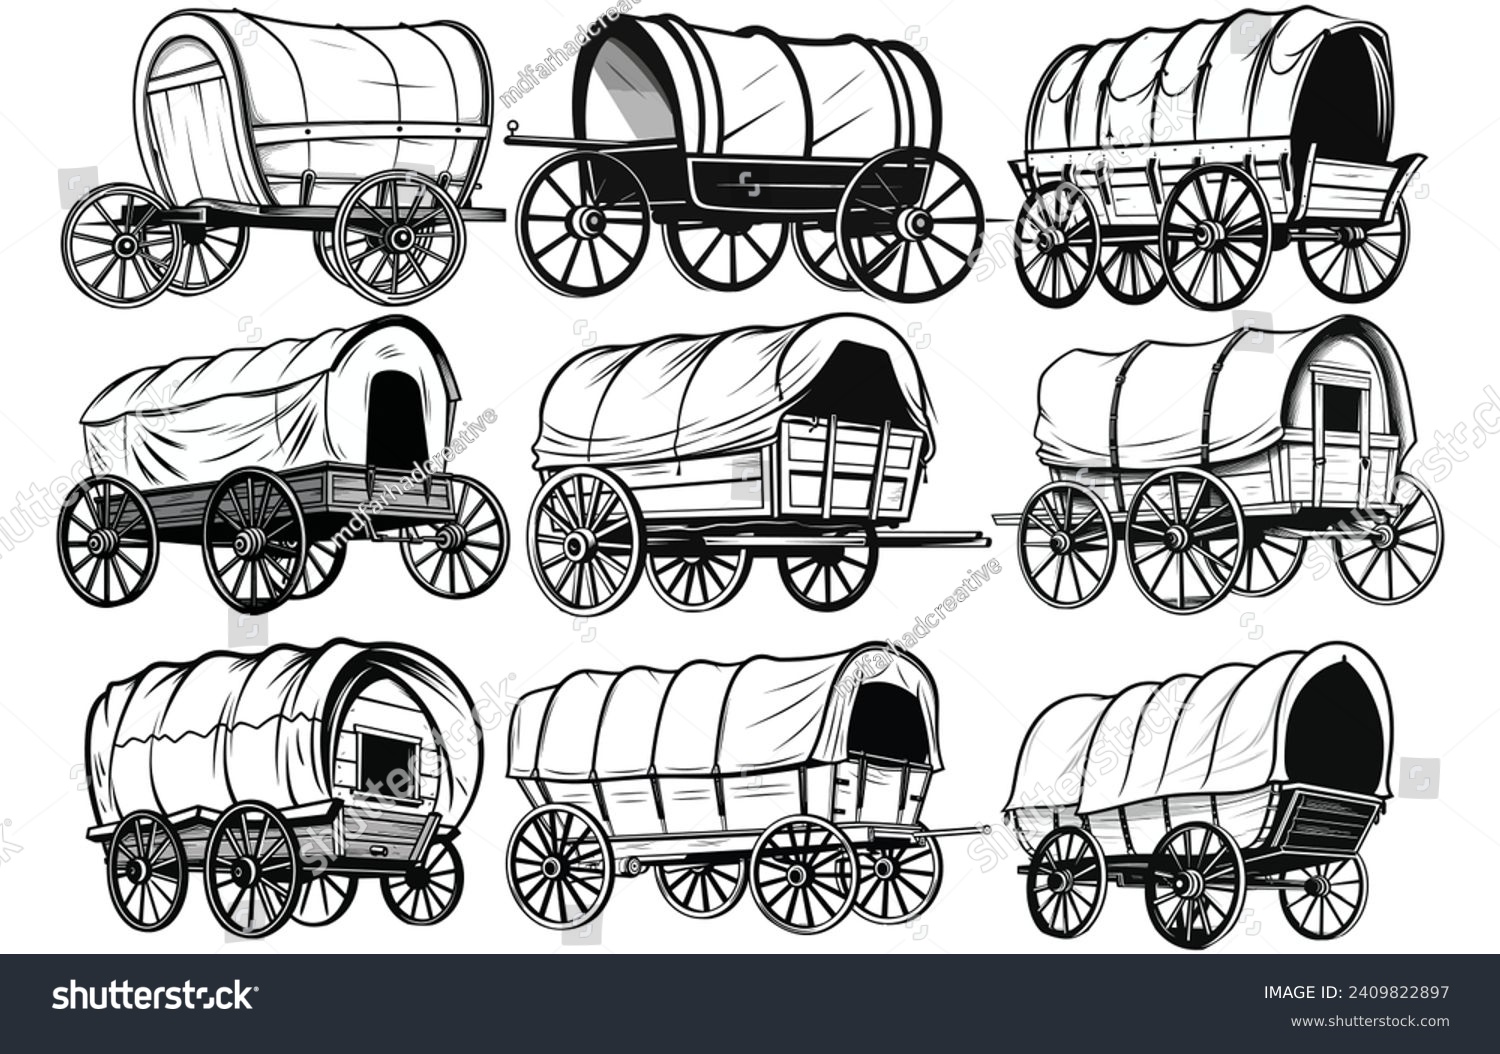 SVG of silhouette of Cowboy Cart Covered Wagon Western svg